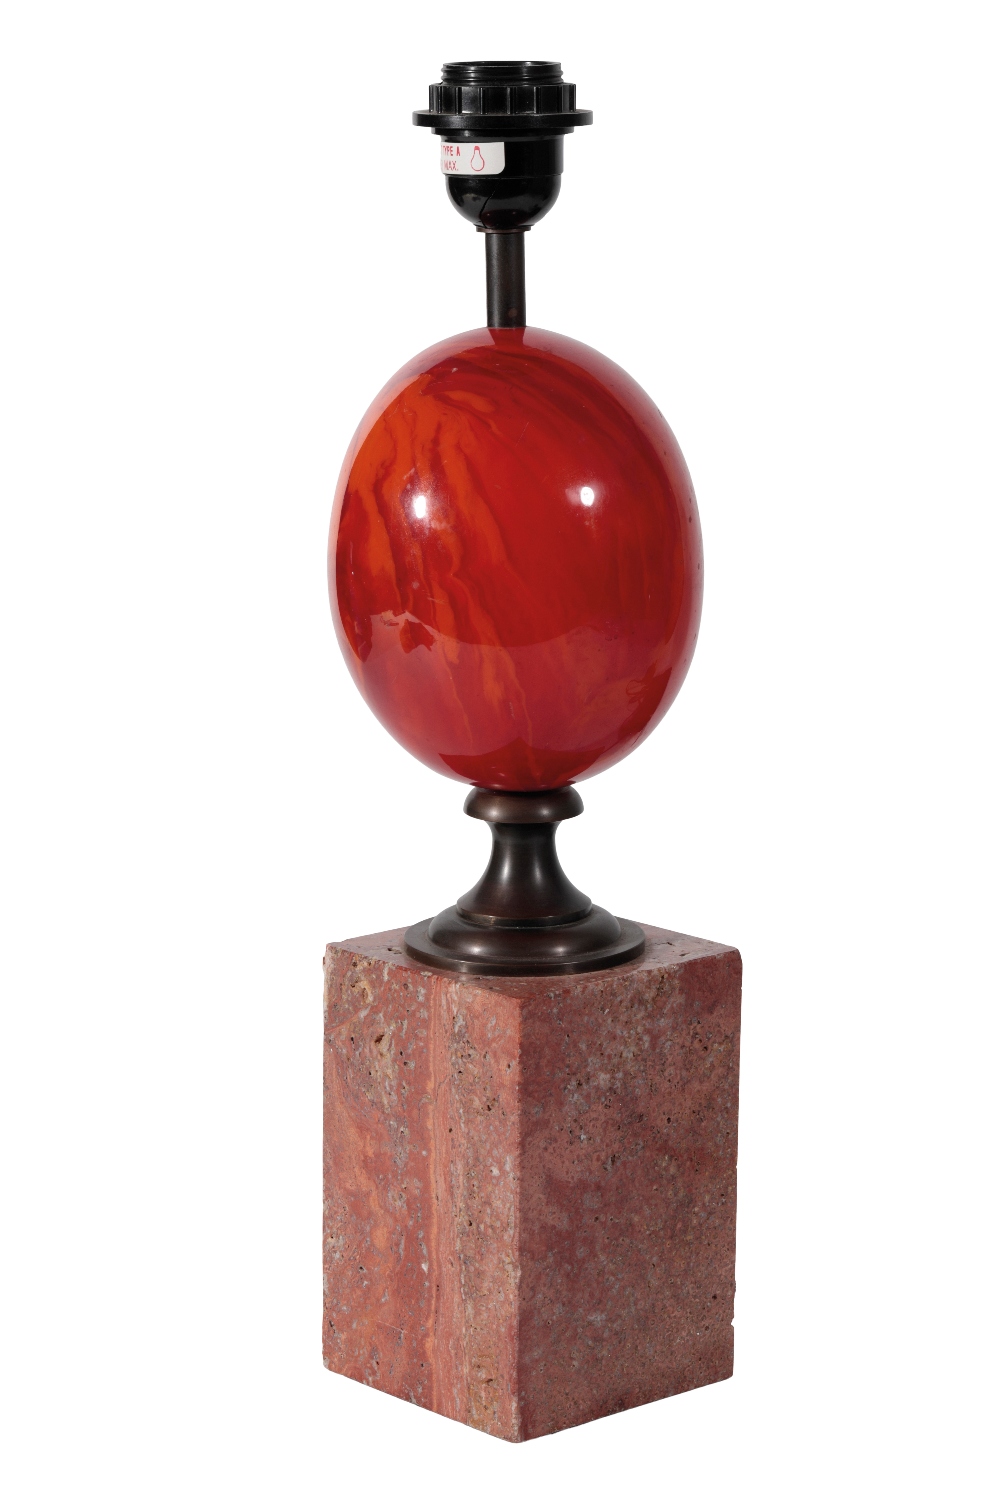 MAISON CHARLES: A RESIN OSTRICH" EGG TABLE LAMP"